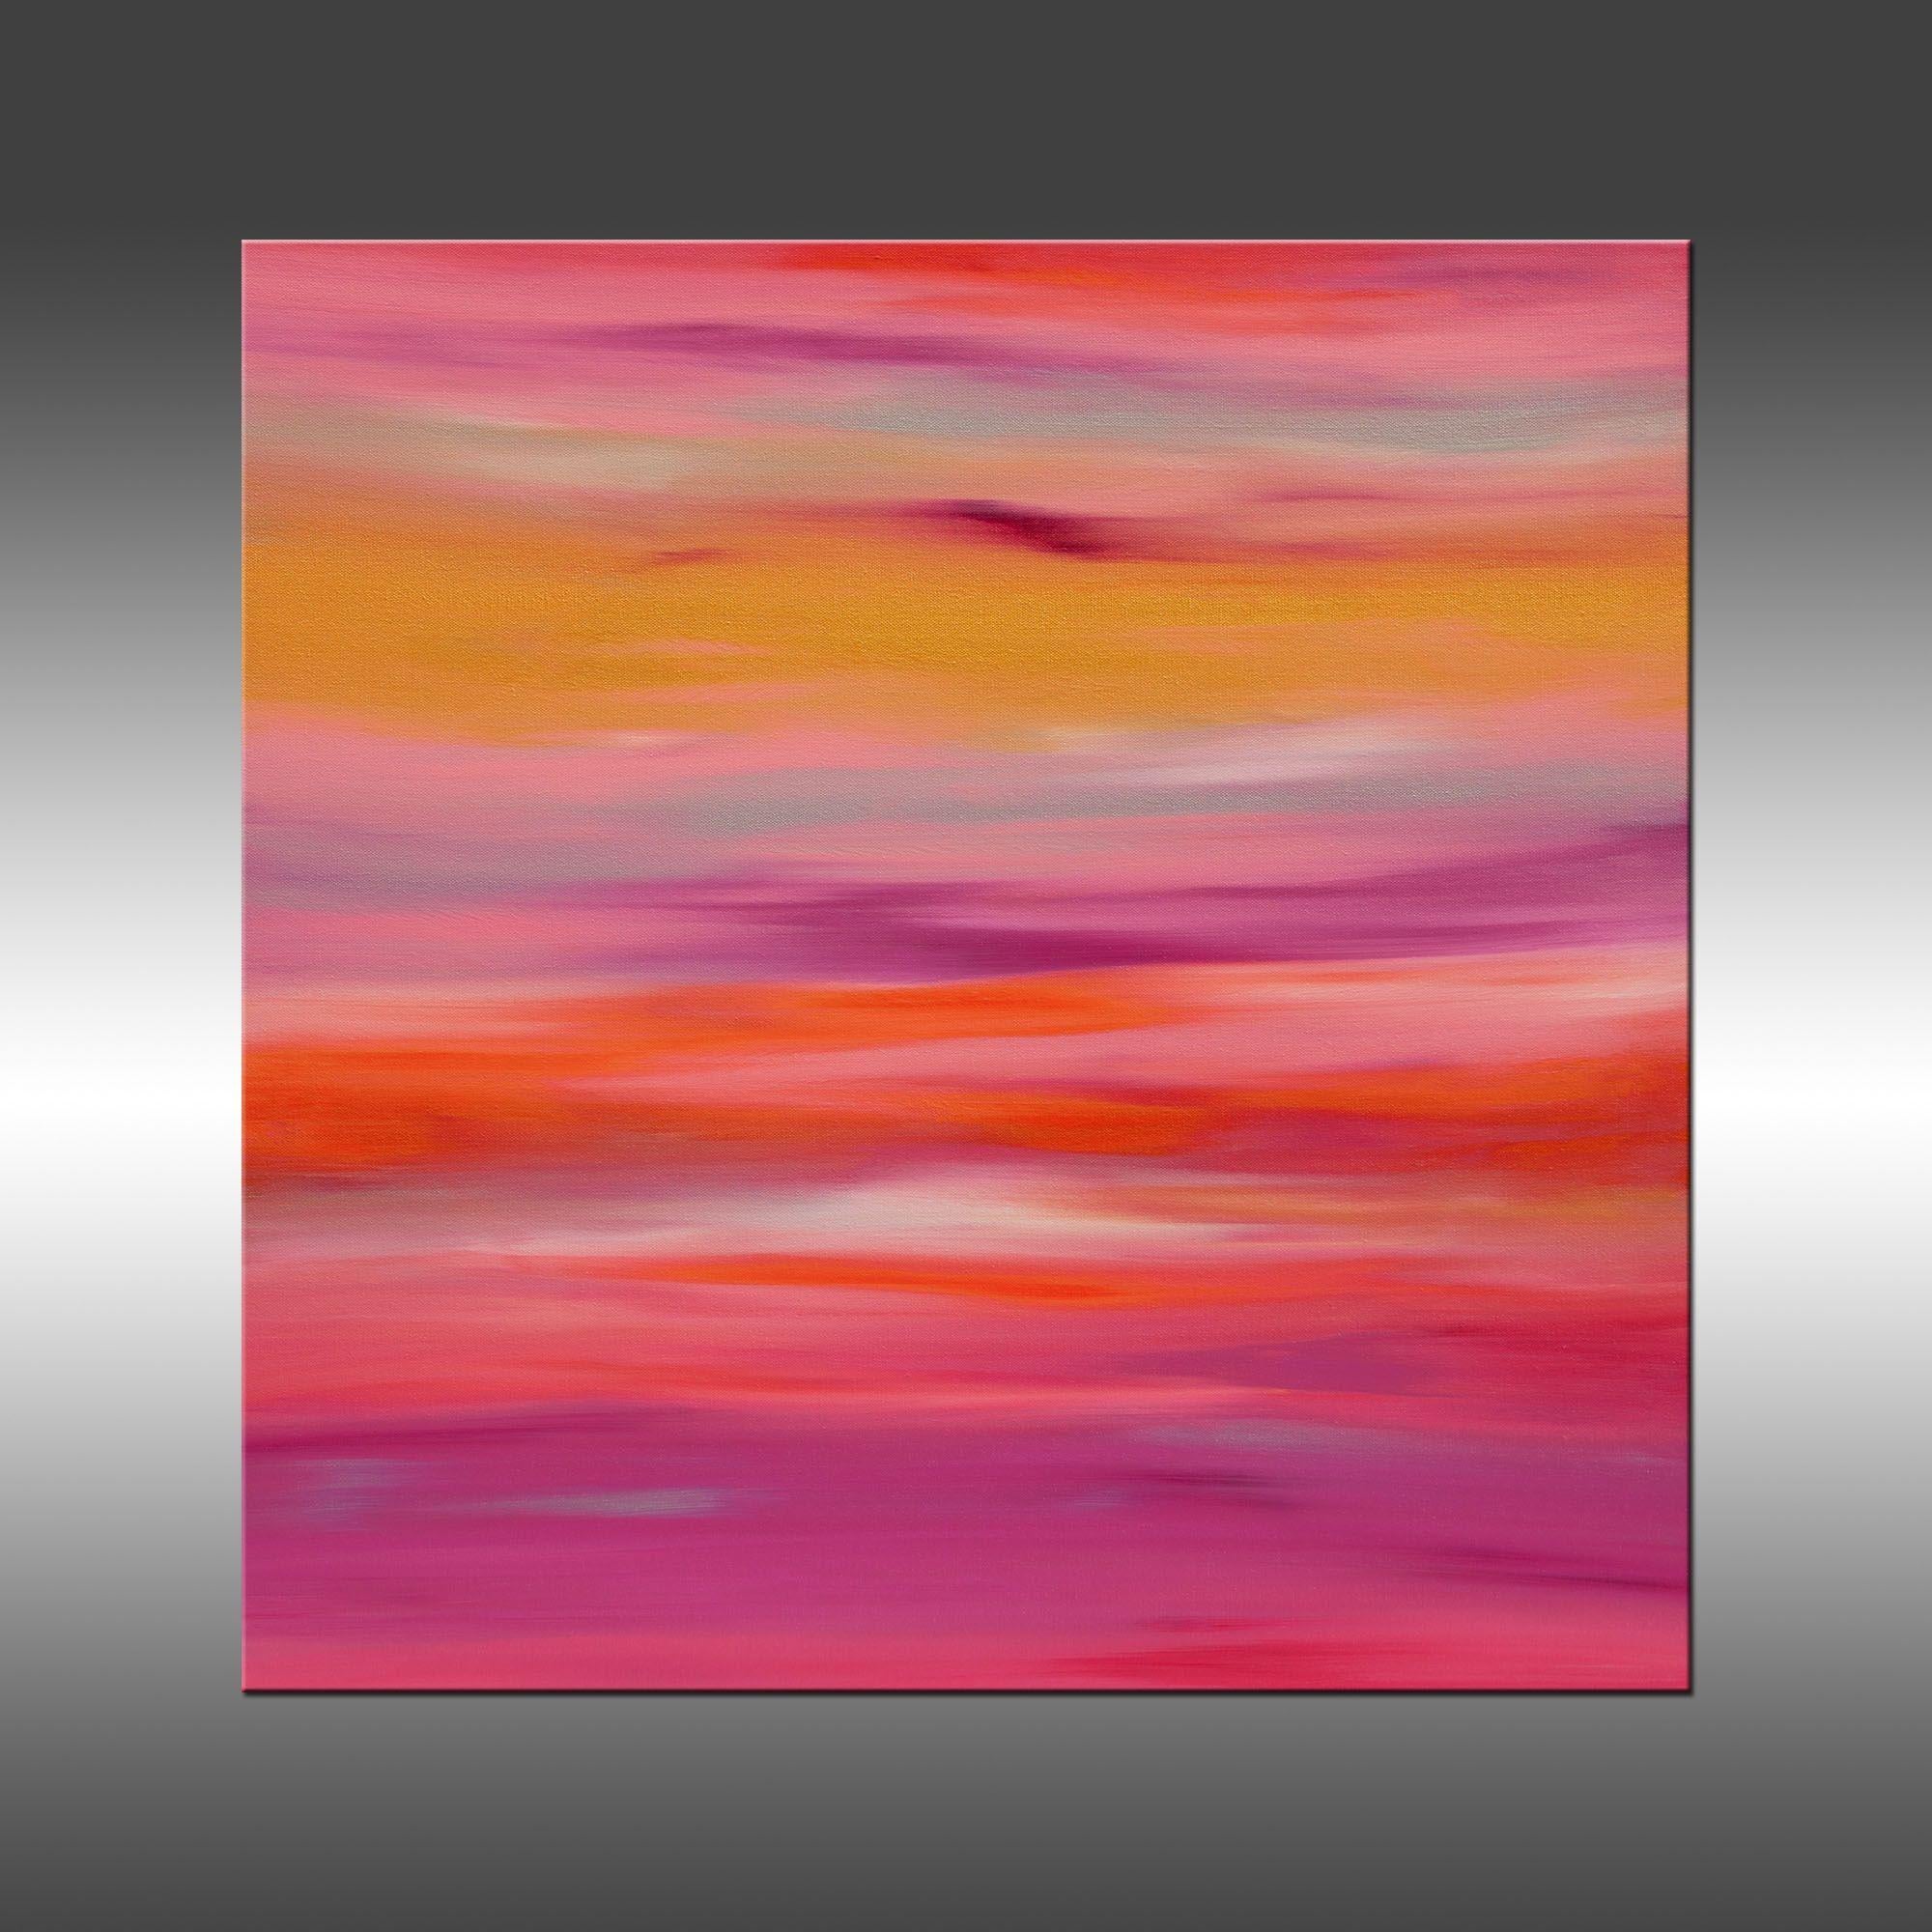 Sunrise 48 is an original painting, created with acrylic paint on gallery-wrapped canvas. It has a width of 30 inches and a height of 30 inches with a depth of 1 inch (30x30x1).     The colors used in the painting are fuchsia, pink, orange, white,